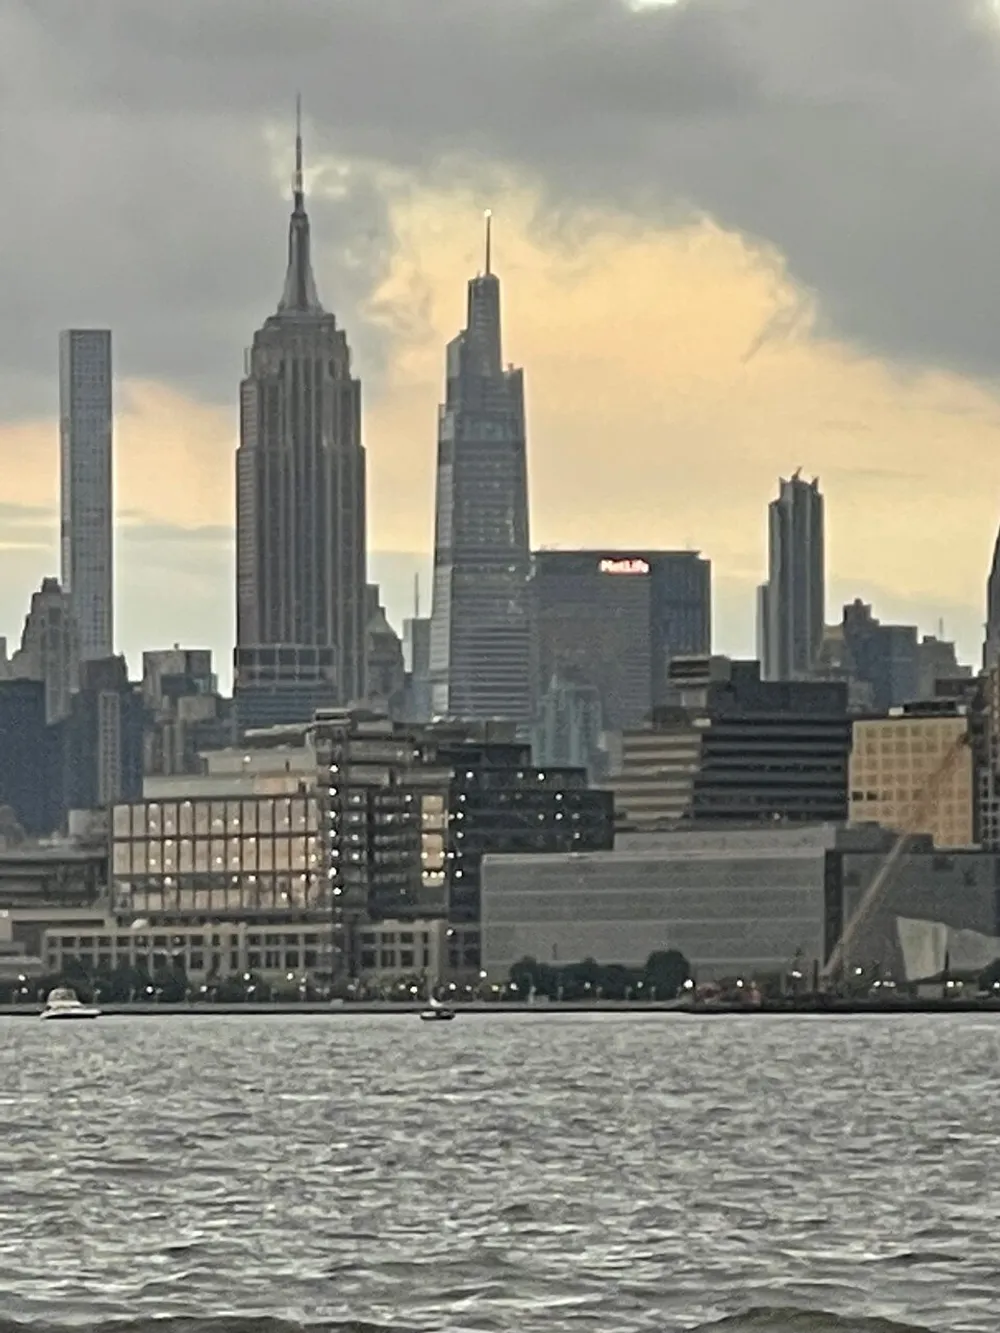 The image captures a cloudy sky over a city skyline with iconic skyscrapers viewed from across a body of water